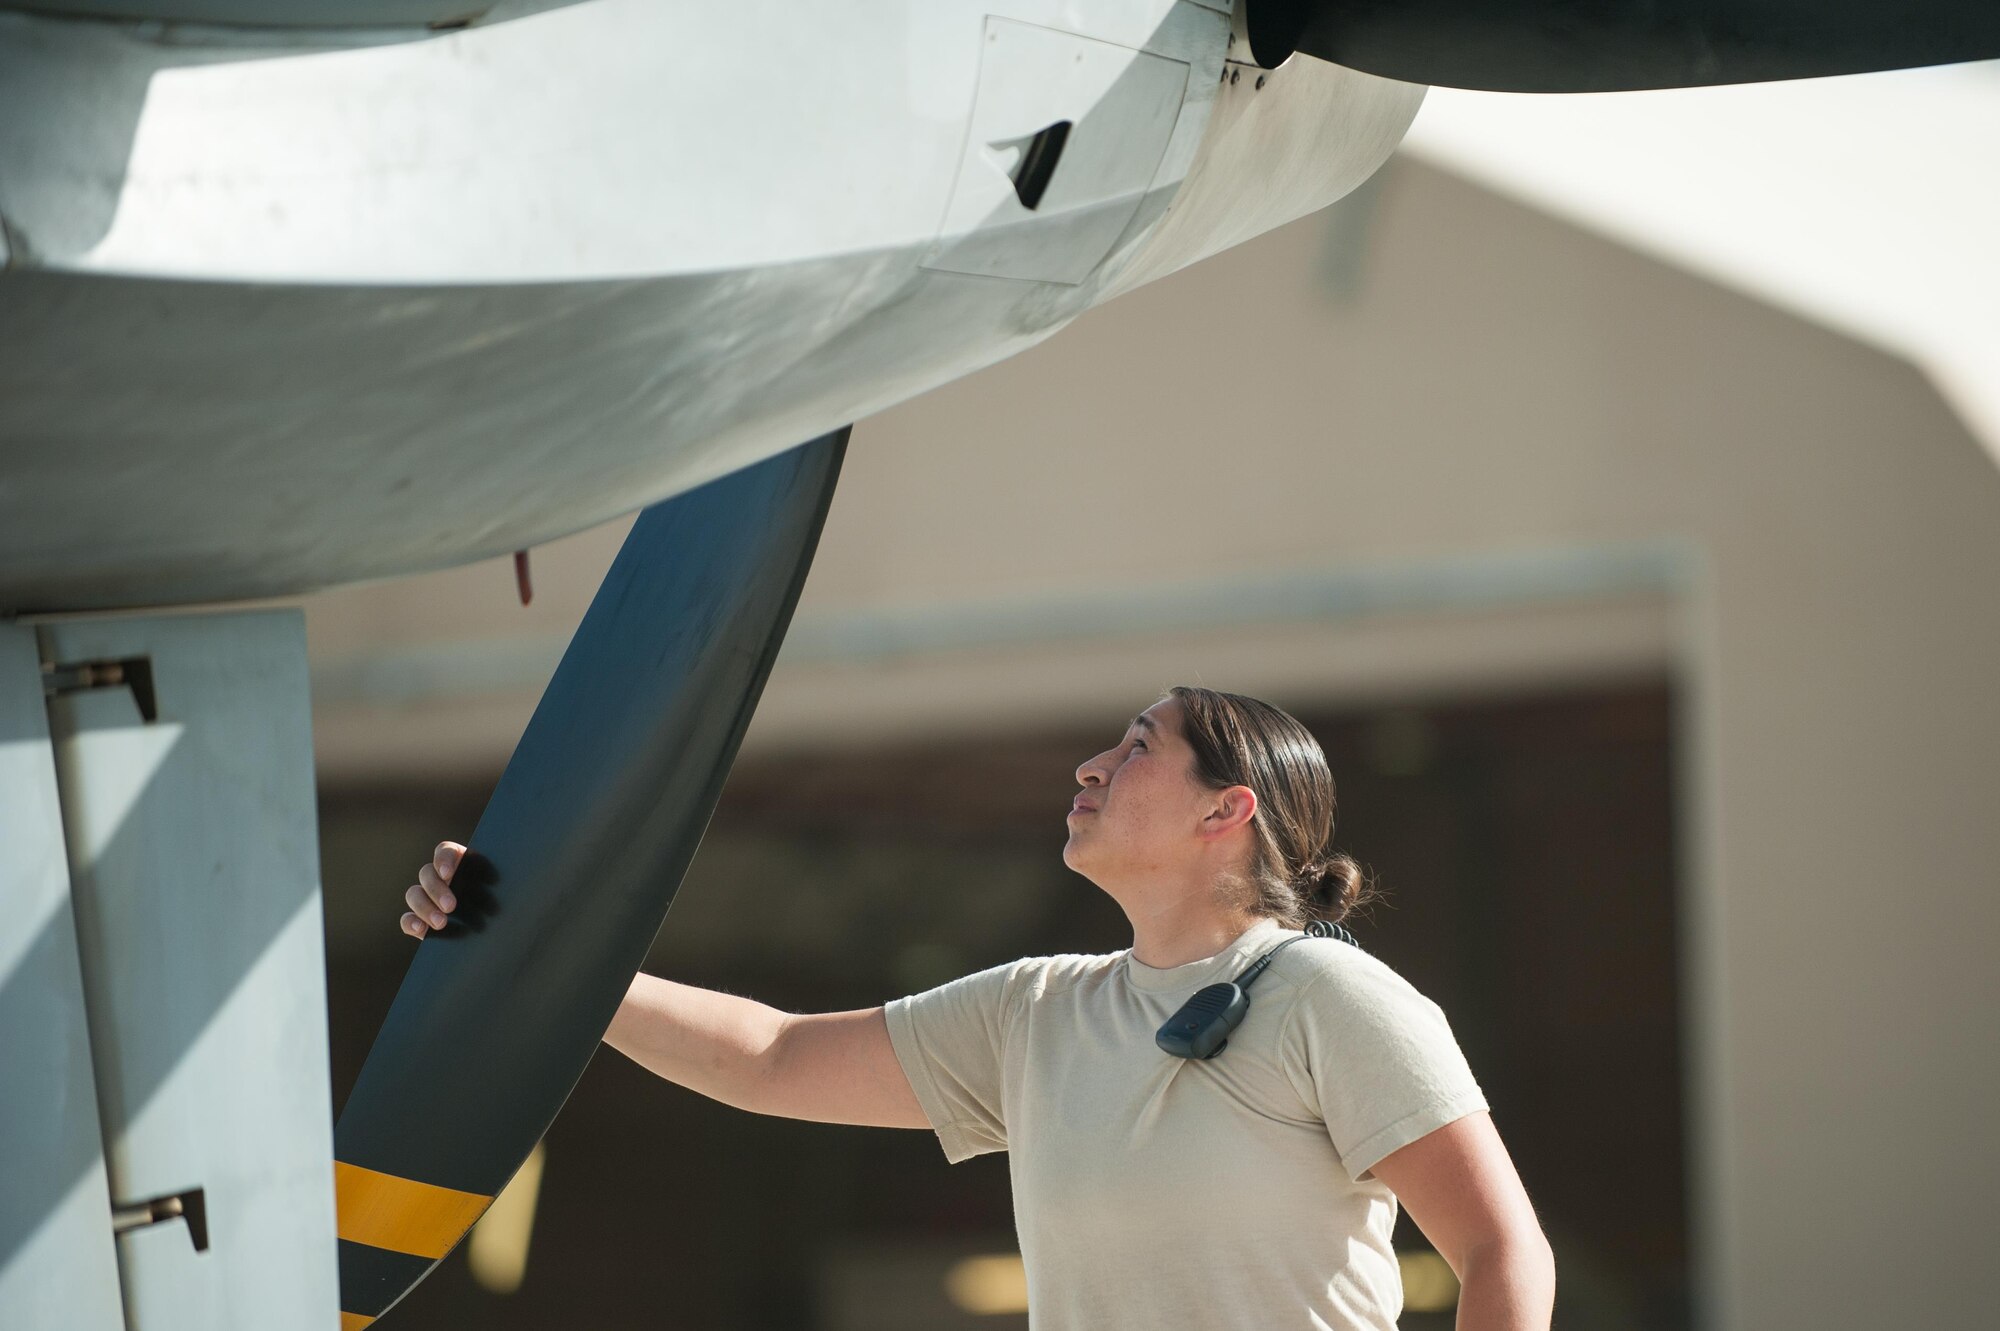 U.S. Air Force Senior Airman Sarah Morales, 62nd Expeditionary Reconnaissance Squadron MQ-9 Reaper aircraft technician, preforms a preflight inspection on a Reaper at Kandahar Airfield, Aug. 14, 2015. Morales keeps the Reapers at KAF in the air by performing routine maintenance on the aircraft as well as launching and recovering them to keep the missions and sorties going. (U.S. Air Force photo by Tech. Sgt. Joseph Swafford/Released)